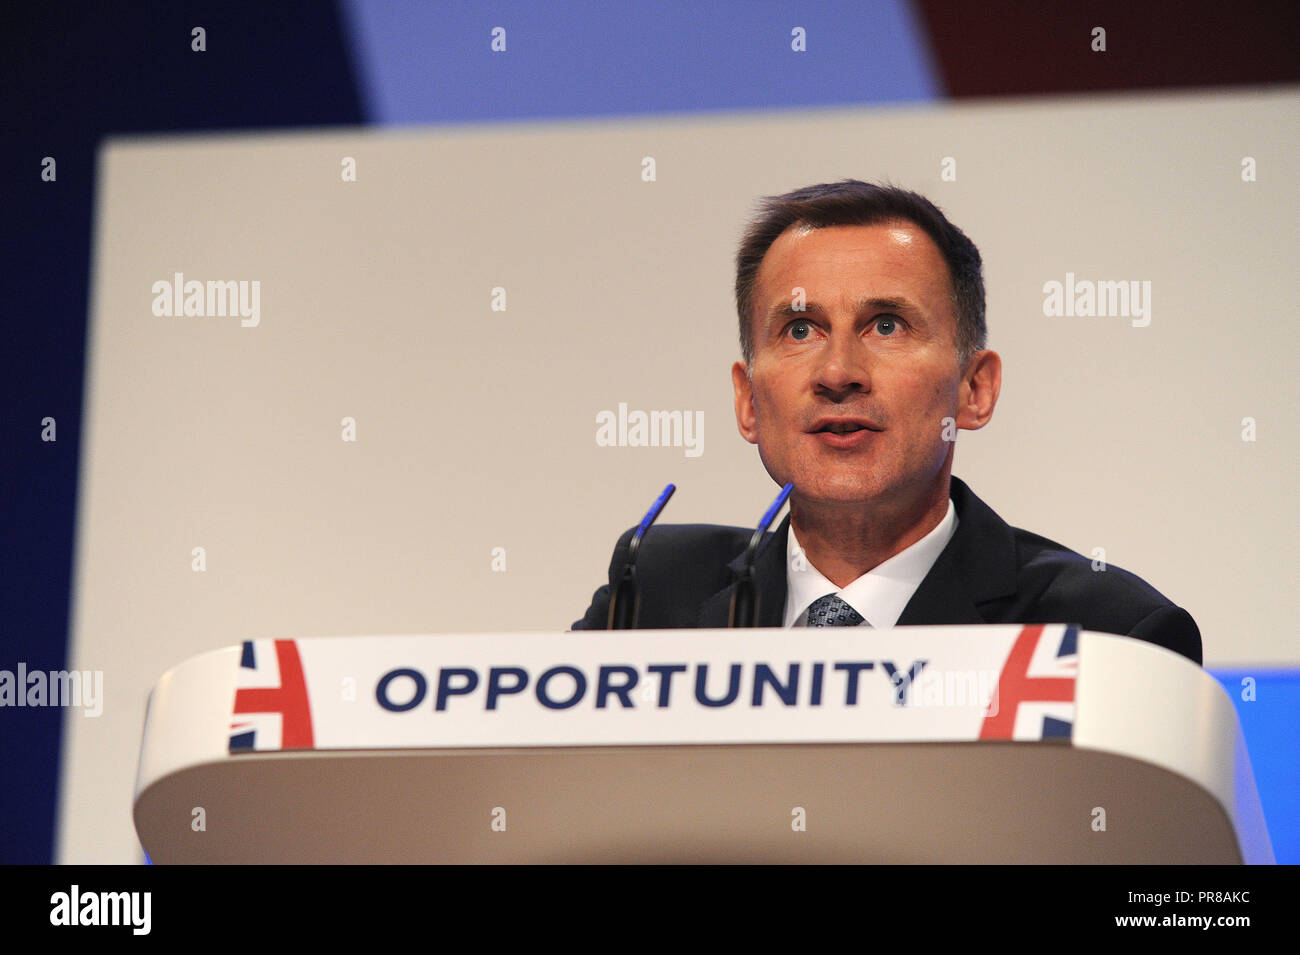 Birmingham, UK. 30th September, 2018.  Jeremy Hunt MP, Secretary of State for Foreign and Commonwealth Affairs, delivers his speech to conference on the opening session of the first day of the Conservative Party annual conference at the ICC.  Kevin Hayes/Alamy Live News Stock Photo